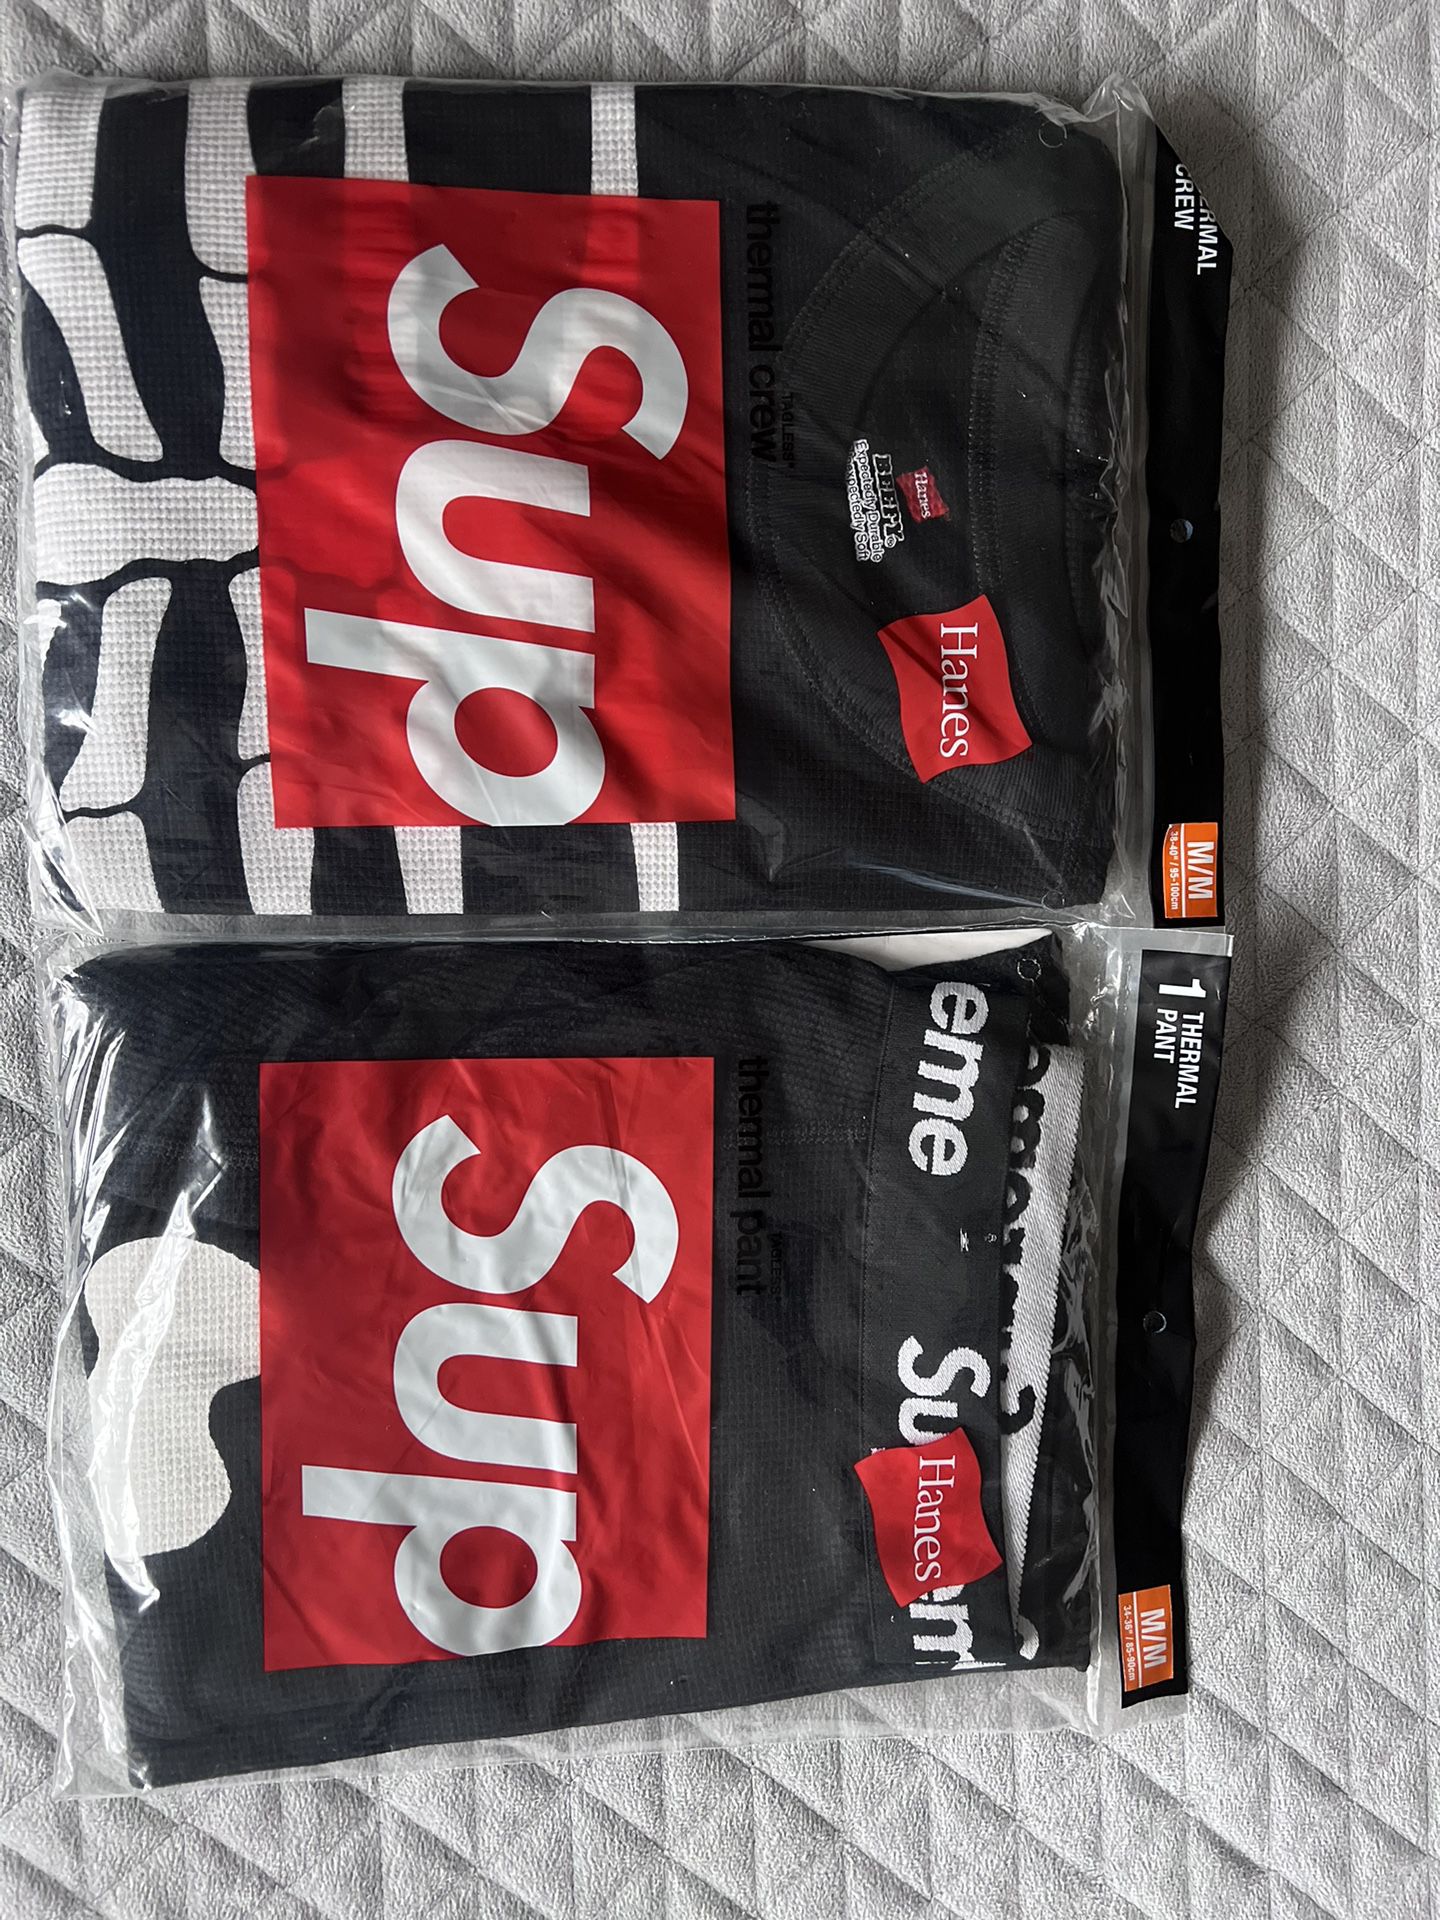 Supreme Thermals Top and Bottom Sz Med $80 